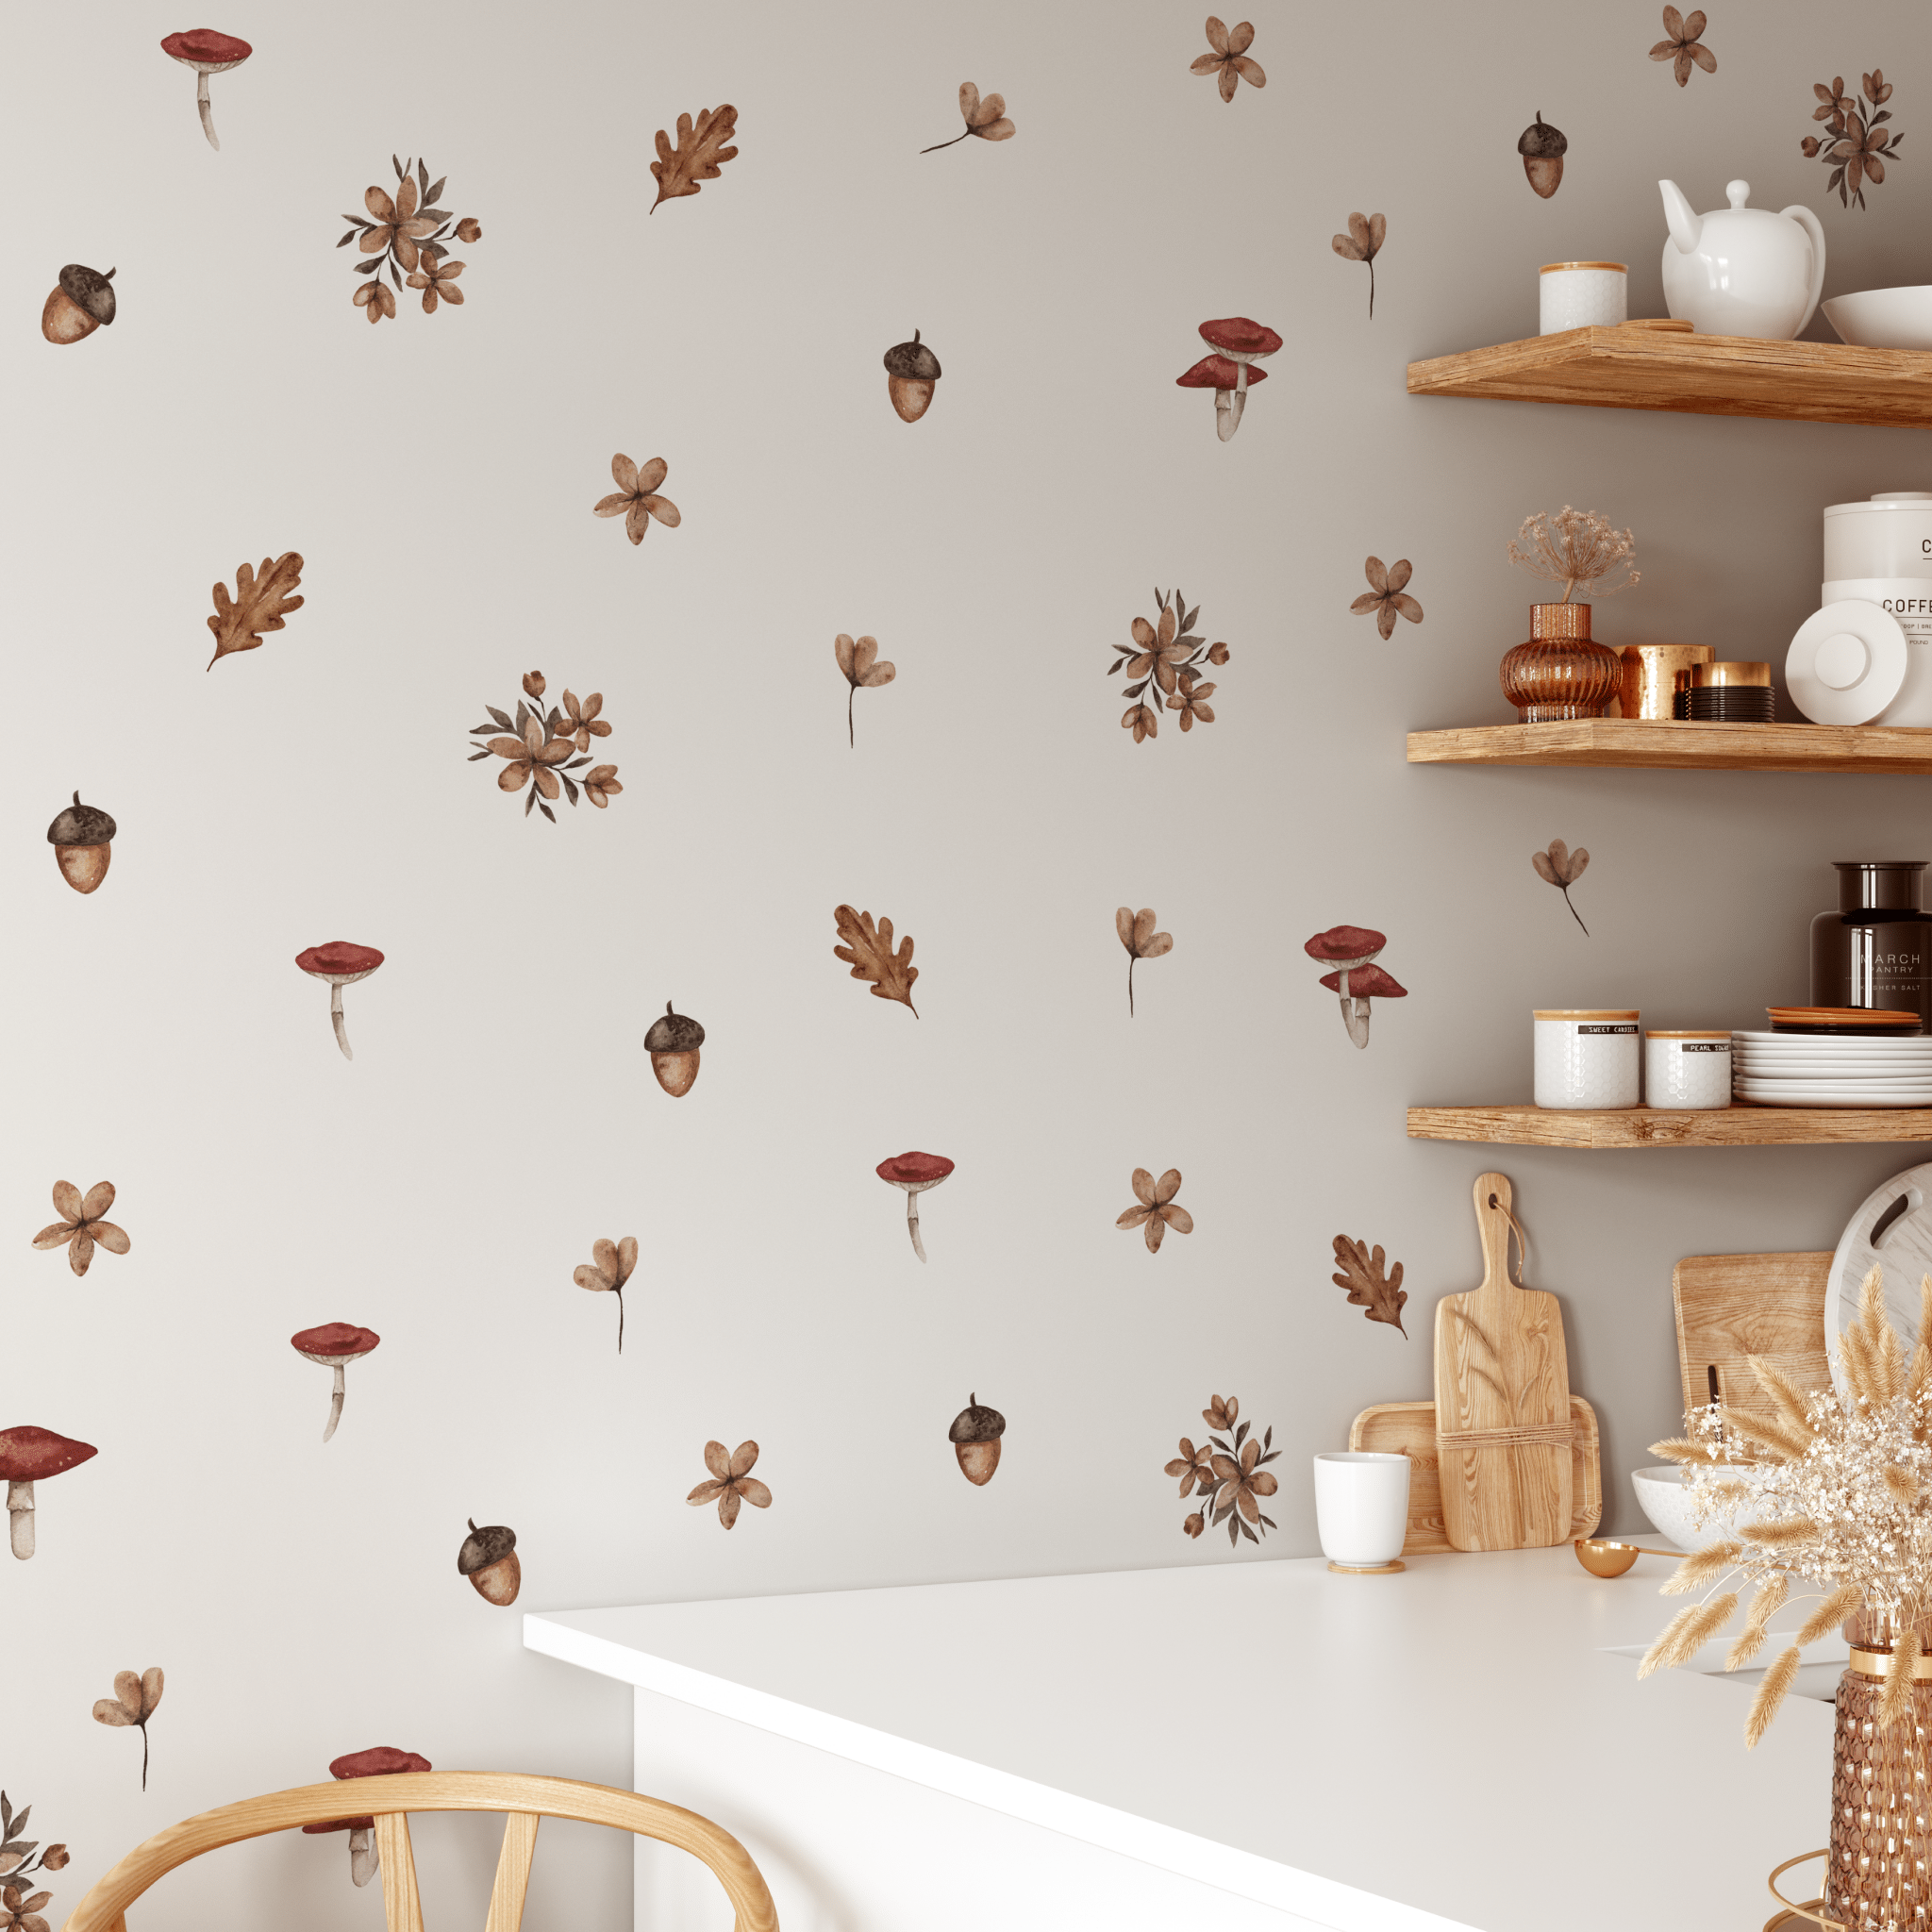 Acorn, Mushroom, Leaf and Flower wall stickers for walls, removable and self adhesive